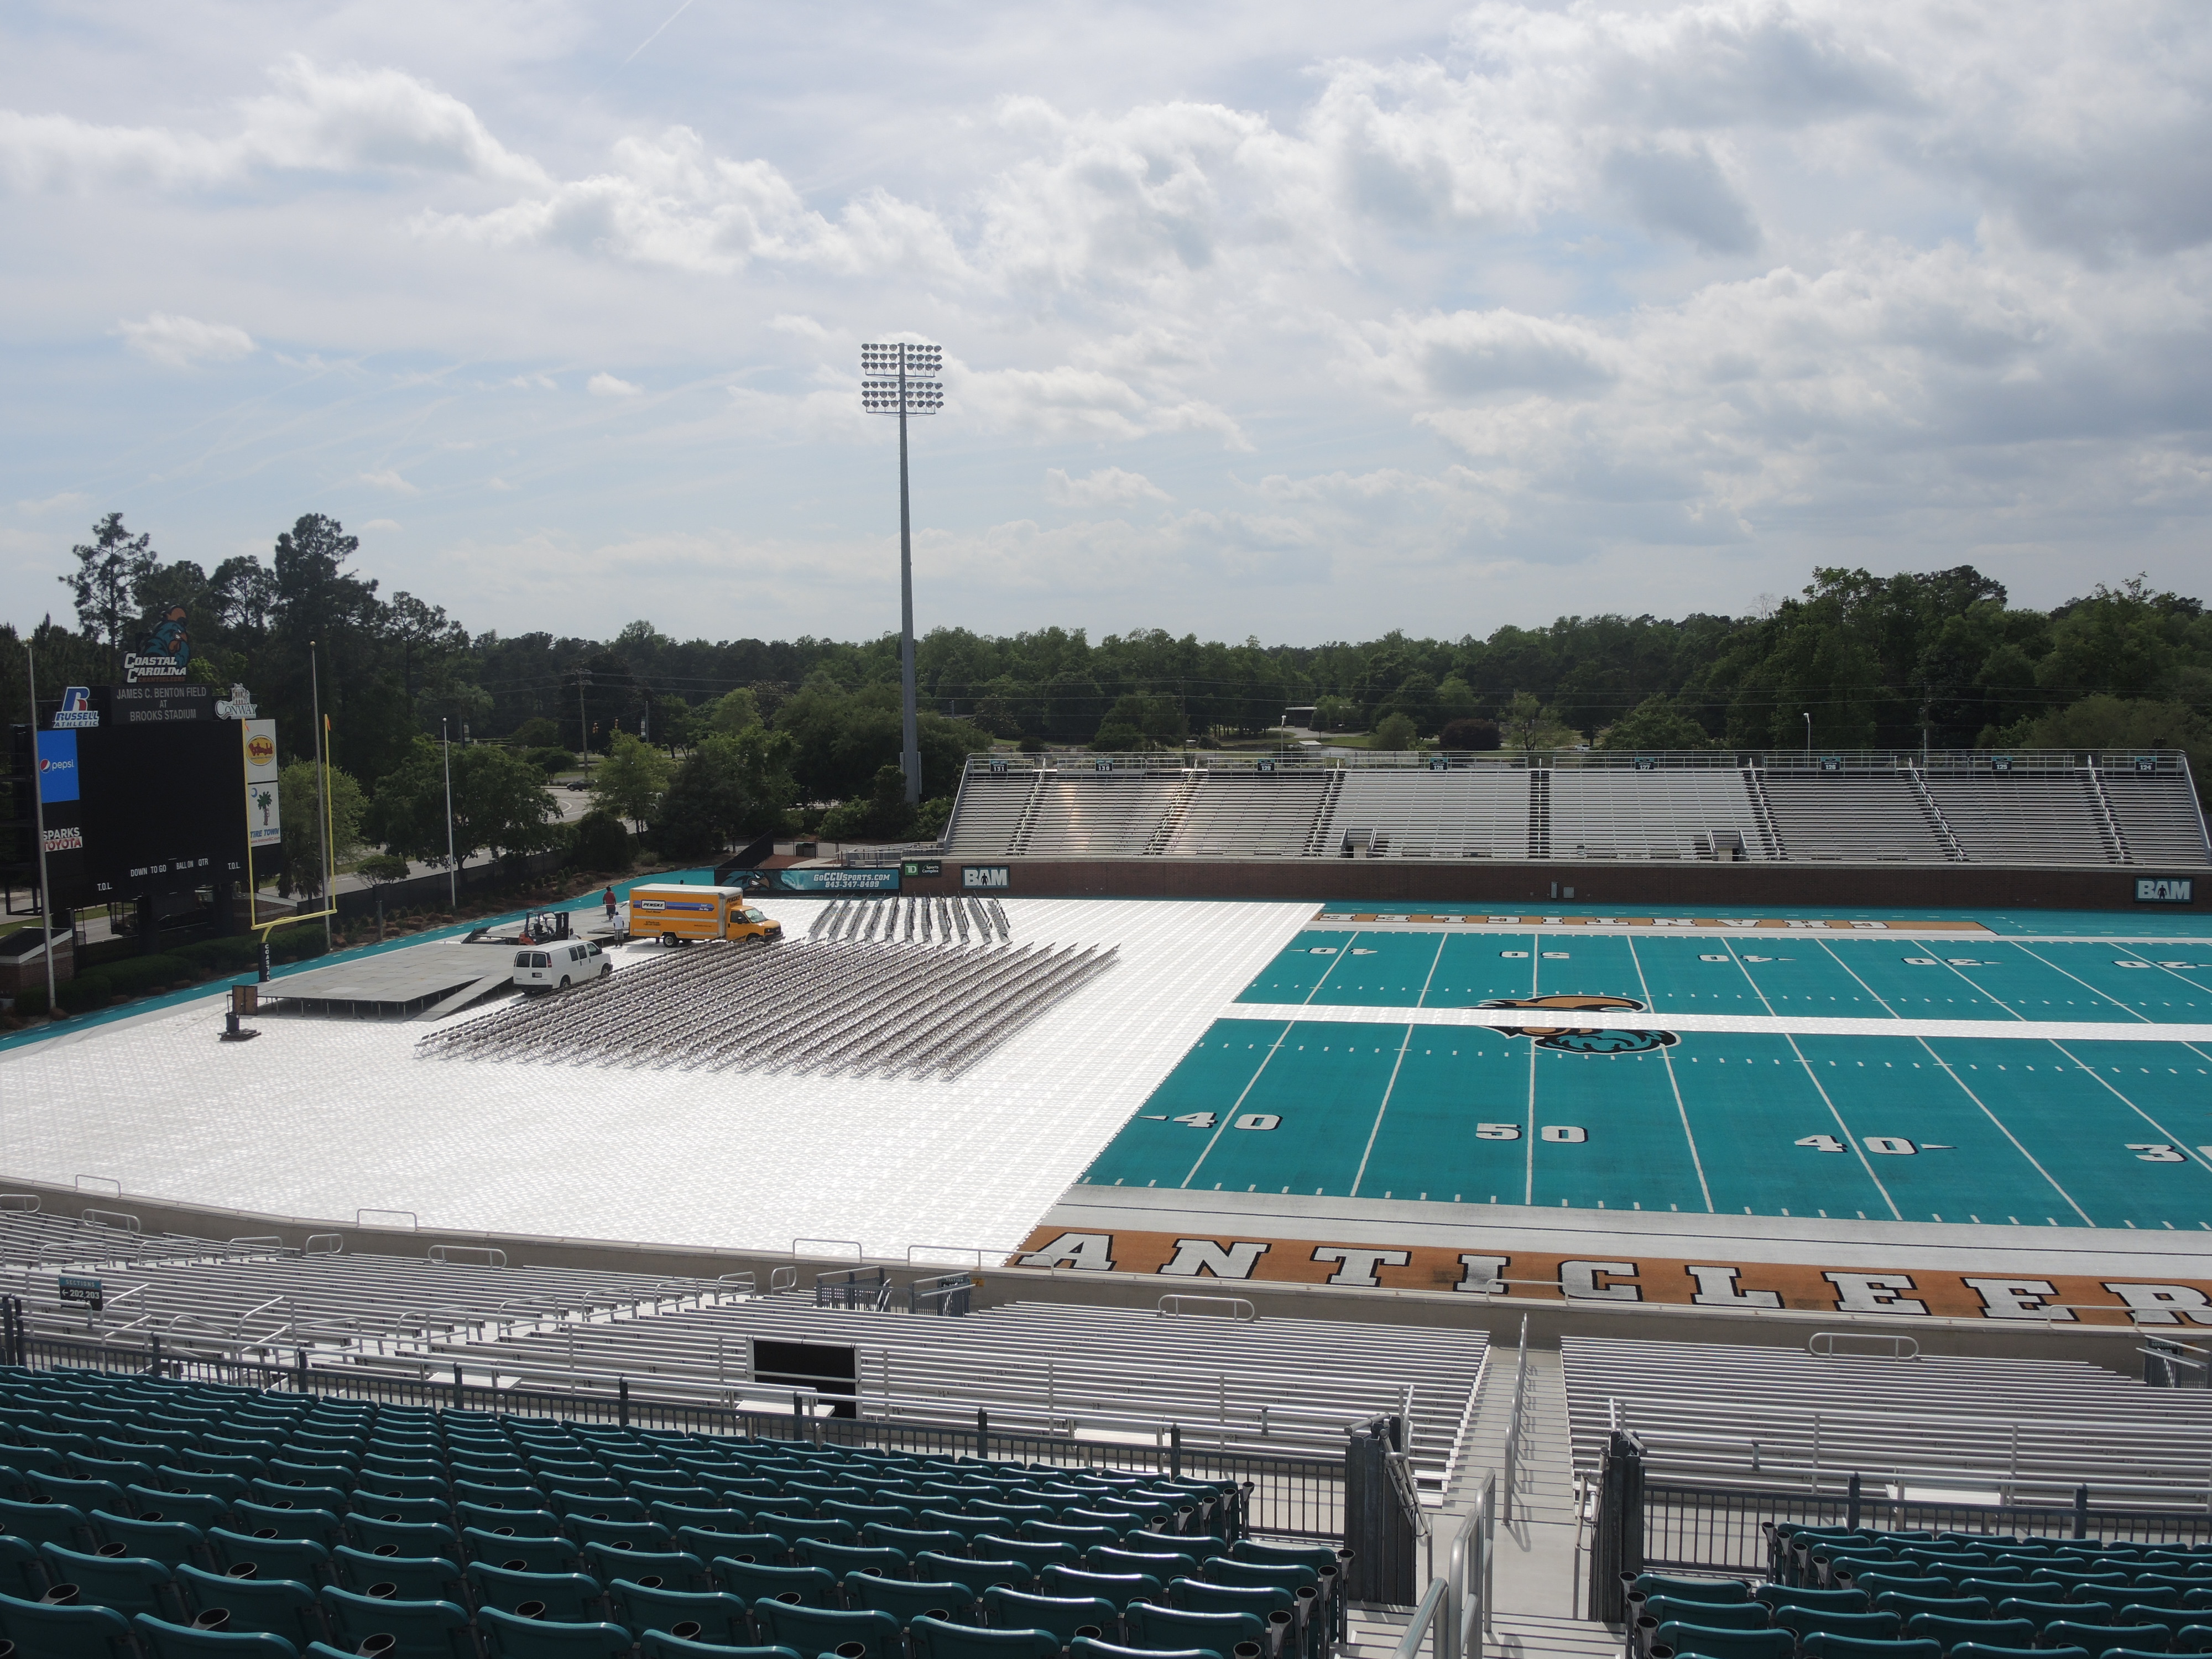 Preparations had already started to make Brooks Stadium ready for commencement. 